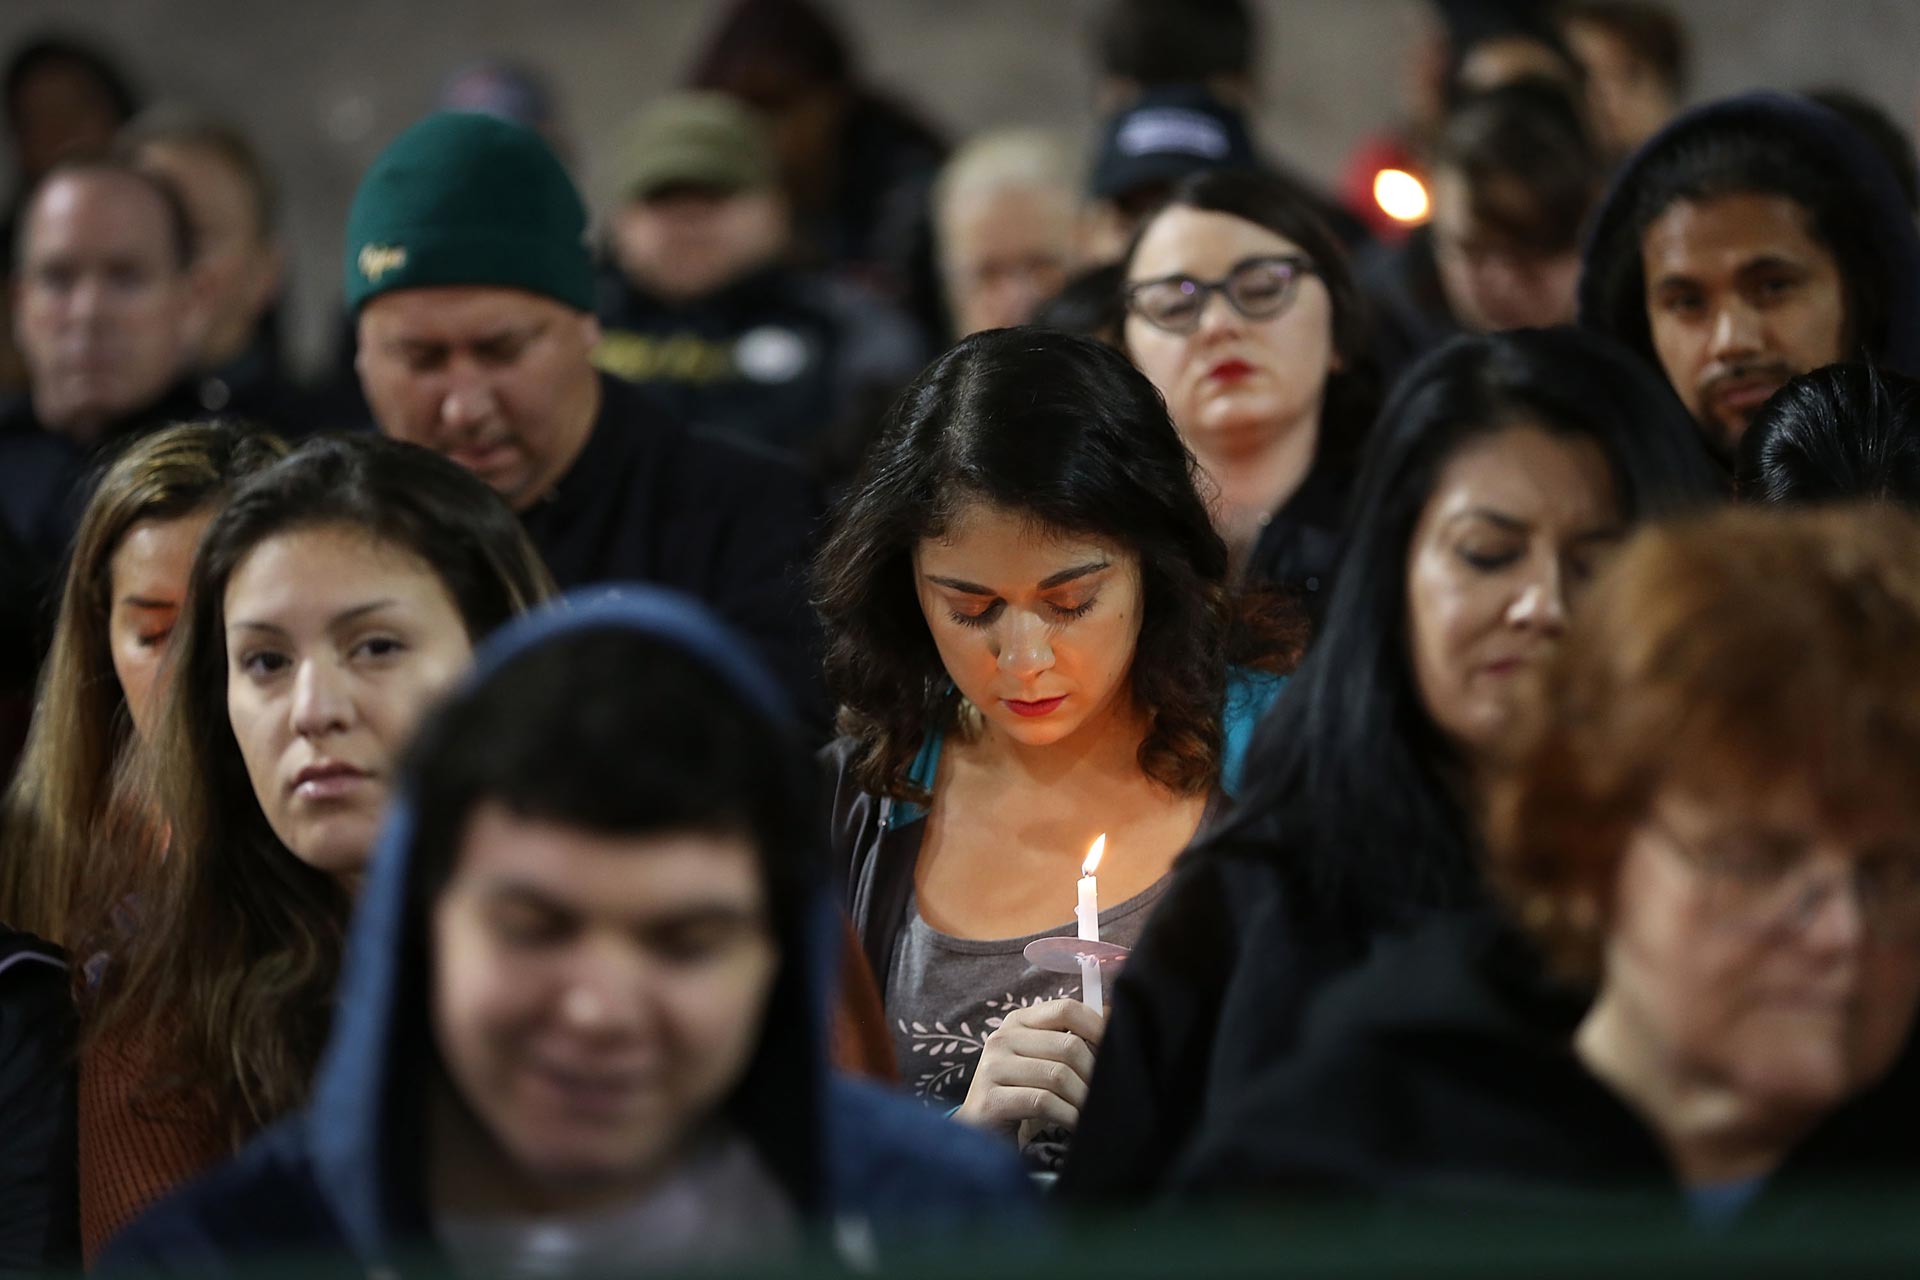 People hold candles as they attend a vigil at the San Manuel Stadium to remember those injured and killed during the shooting at the Inland Regional Center on Dec. 3, 2015 in San Bernardino.